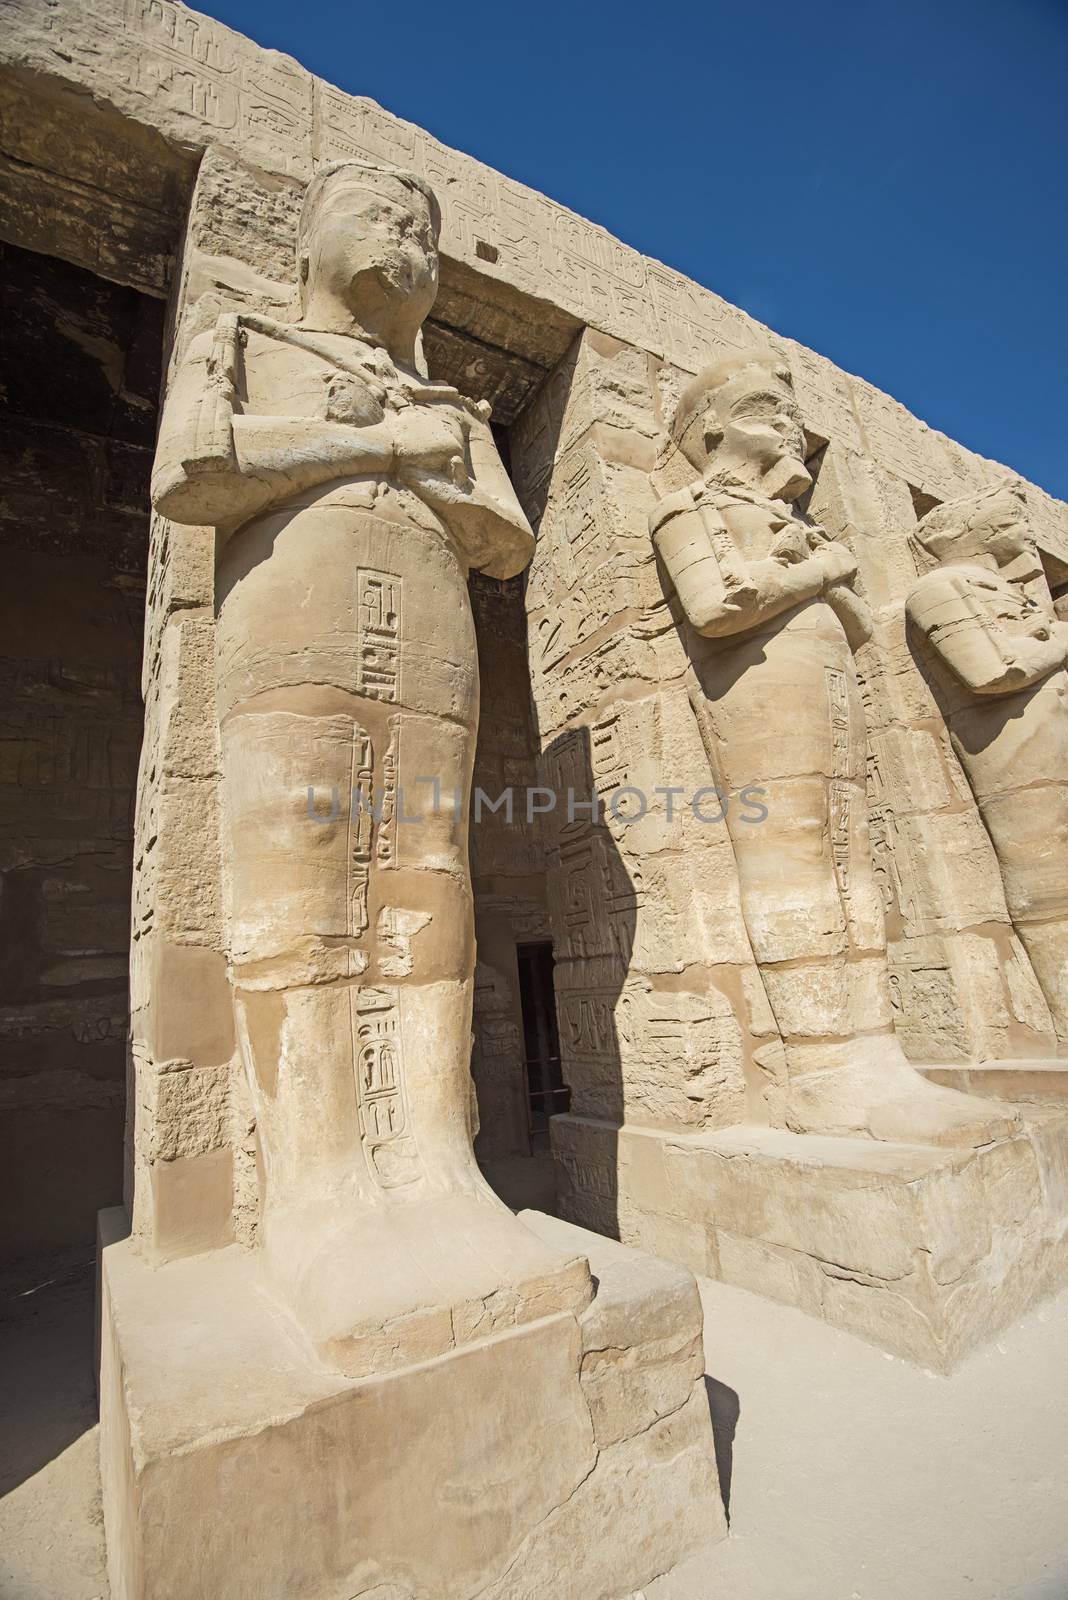 Large statue of Ramses III in ancient egyptian Karnak Temple at Luxor